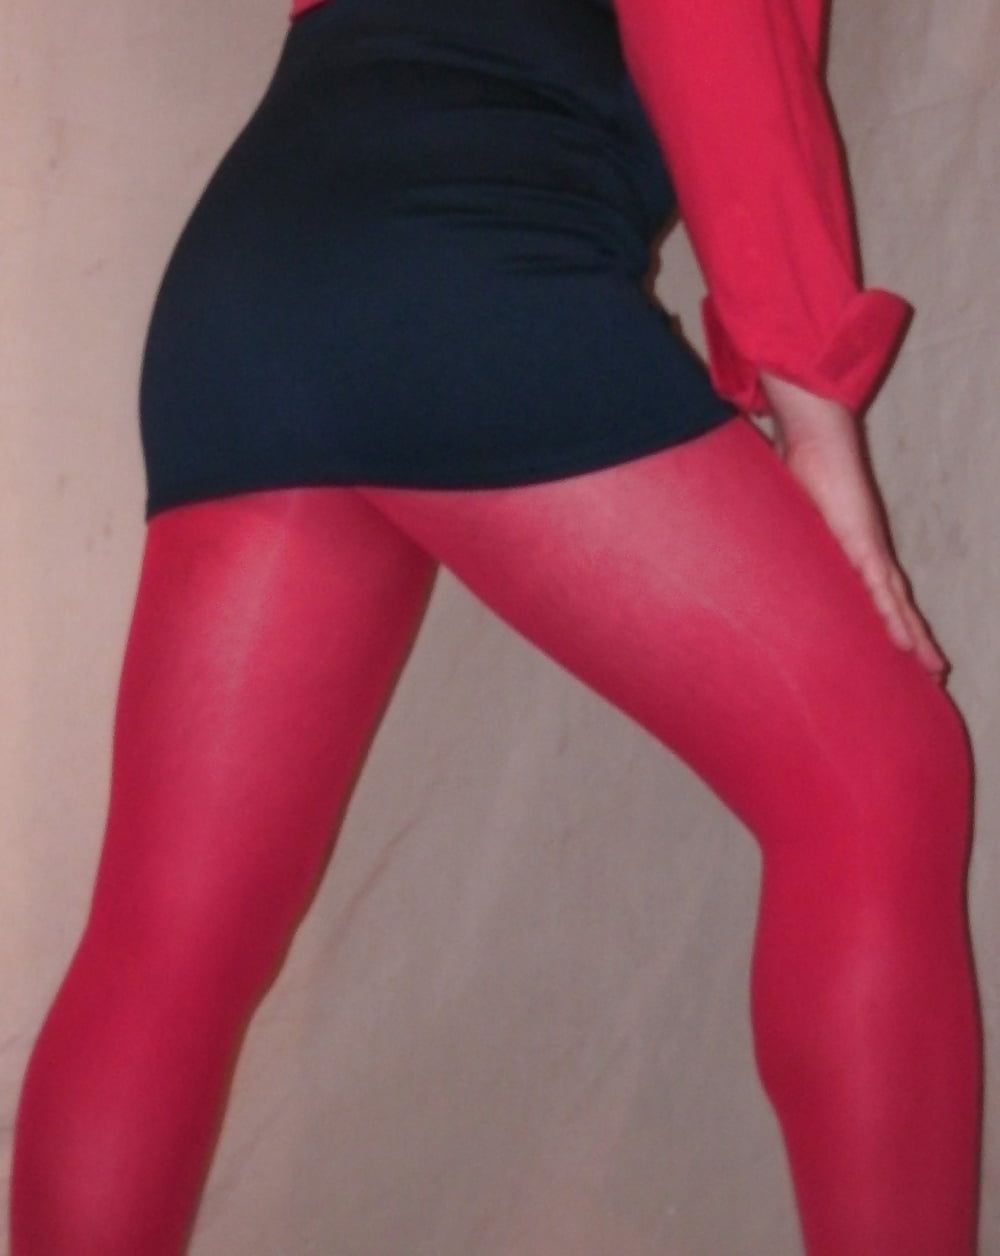 Red stockings #8